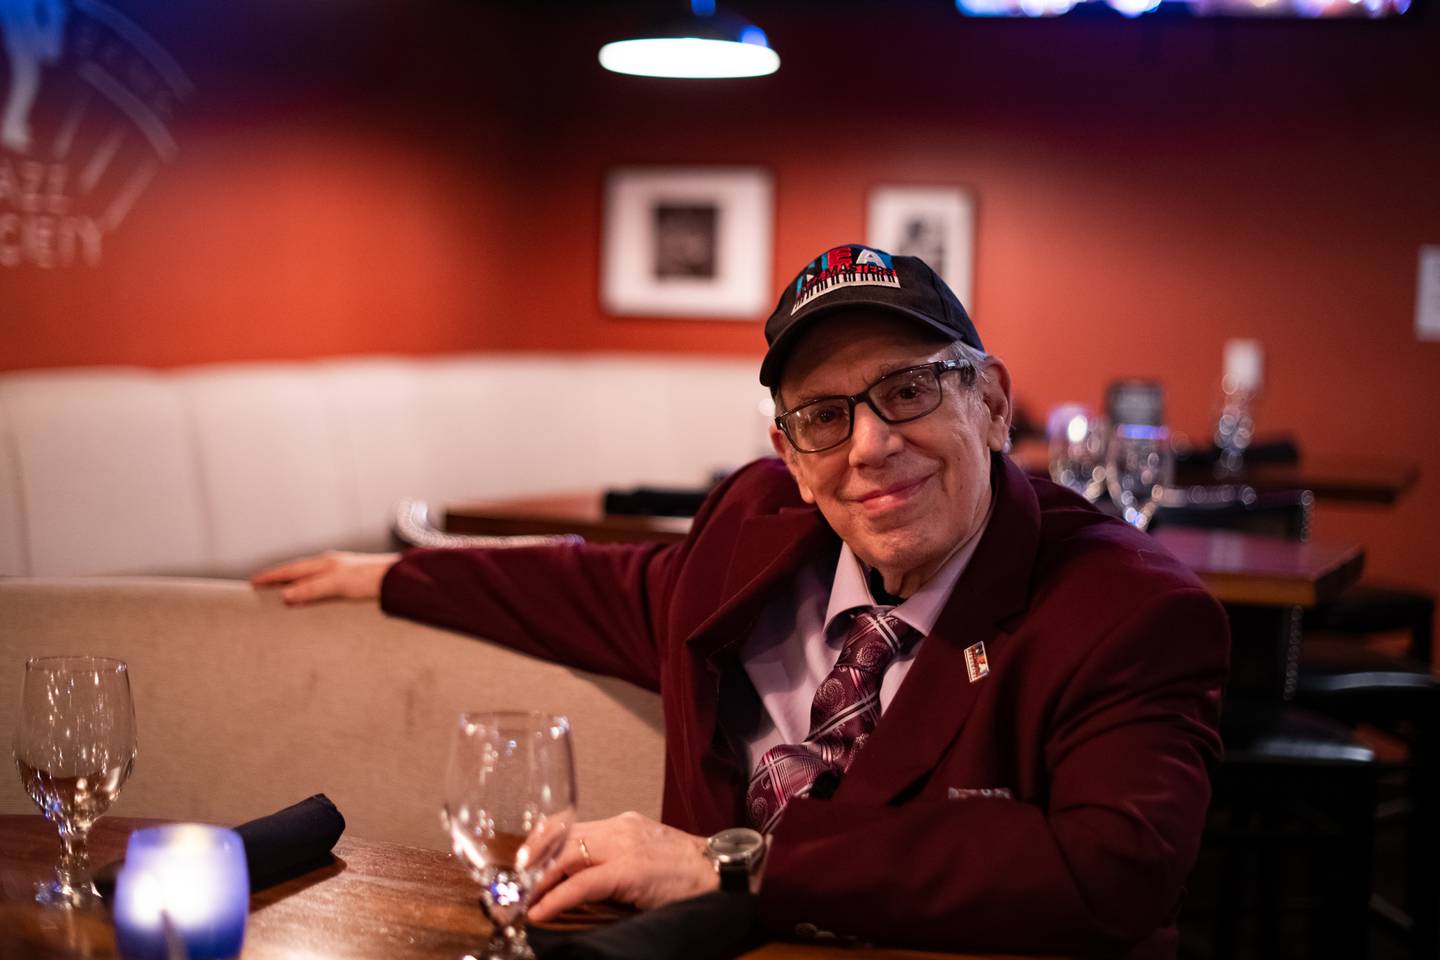 Prolific musician and owner of Keystone Korner, Todd Barkan, takes a portrait inside of his swanky jazz club in Baltimore City, Md., on February 9, 2023.